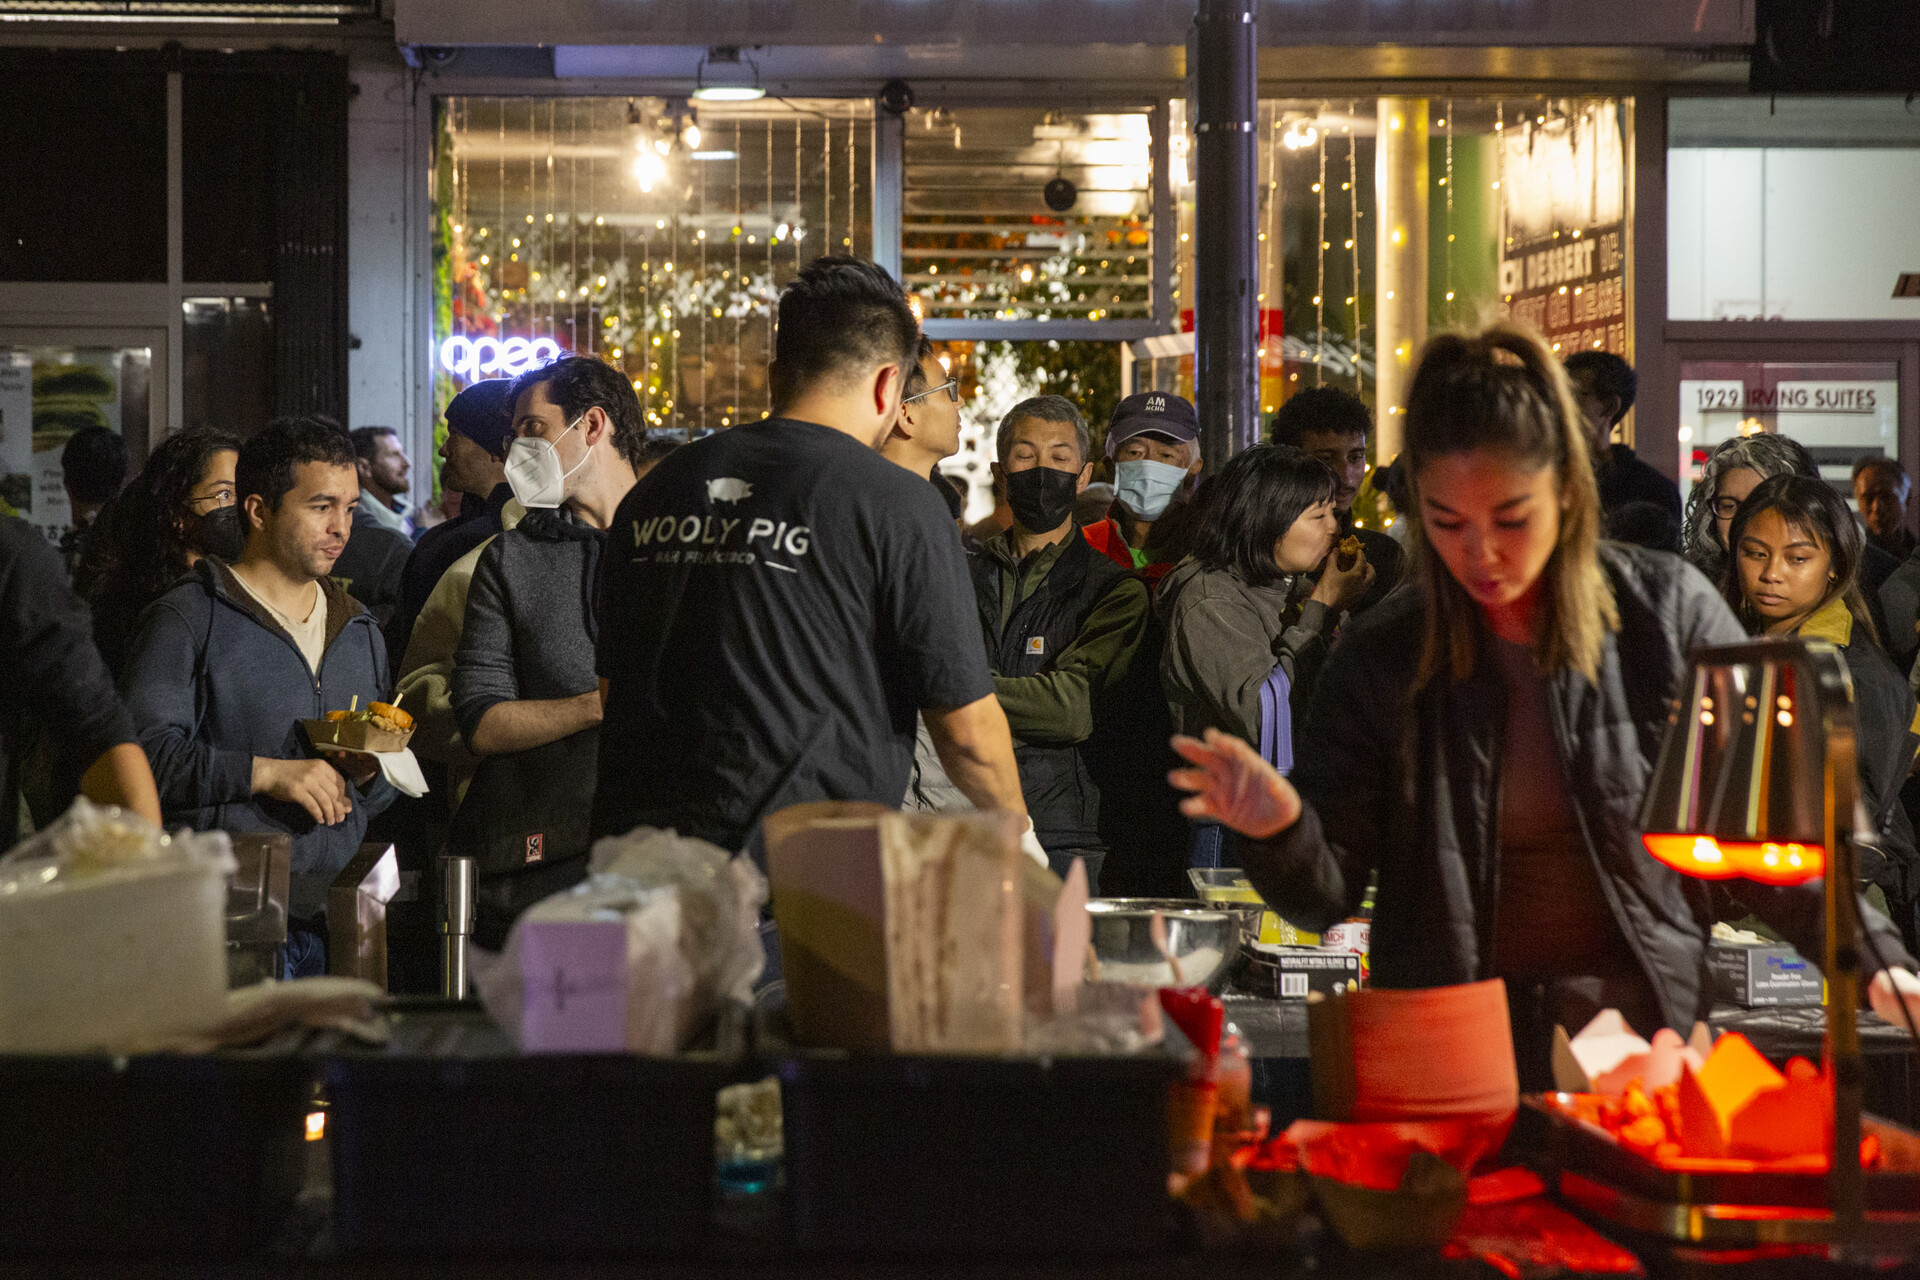 A bustling night market with food and live performances sees crowds of patrons.